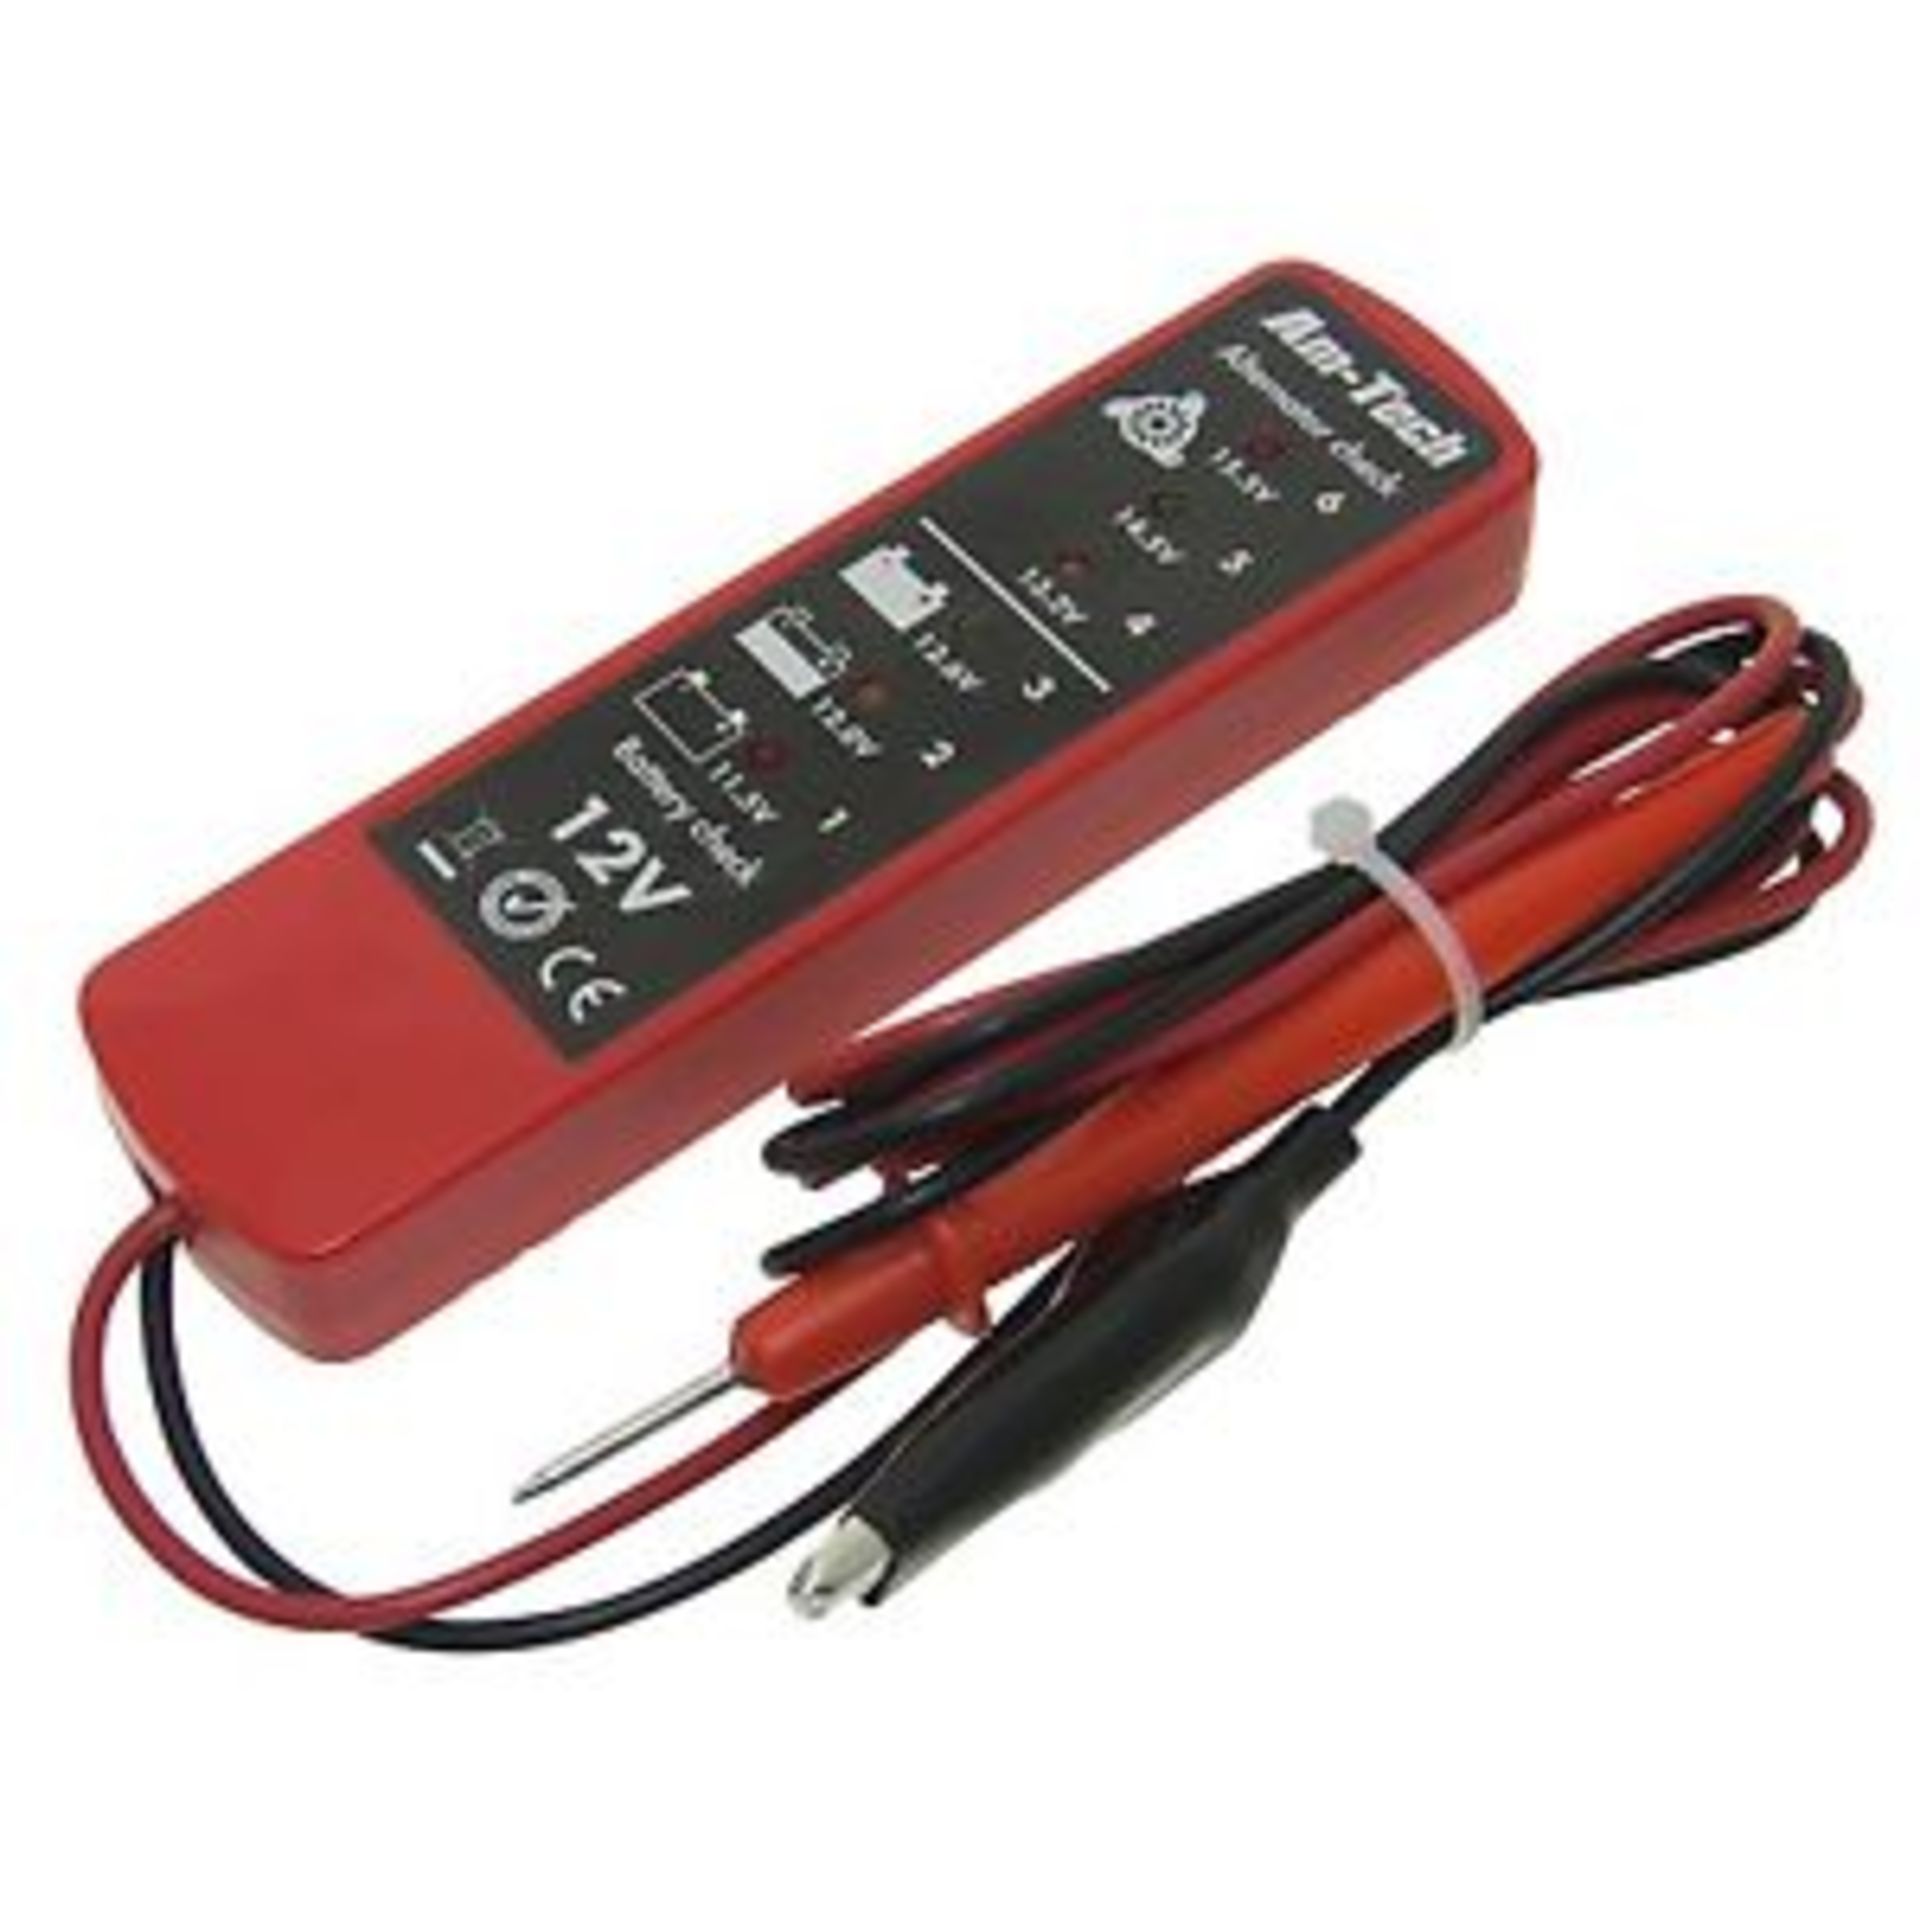 V *TRADE QTY* Brand New Battery & Alternator Tester X 4 YOUR BID PRICE TO BE MULTIPLIED BY FOUR